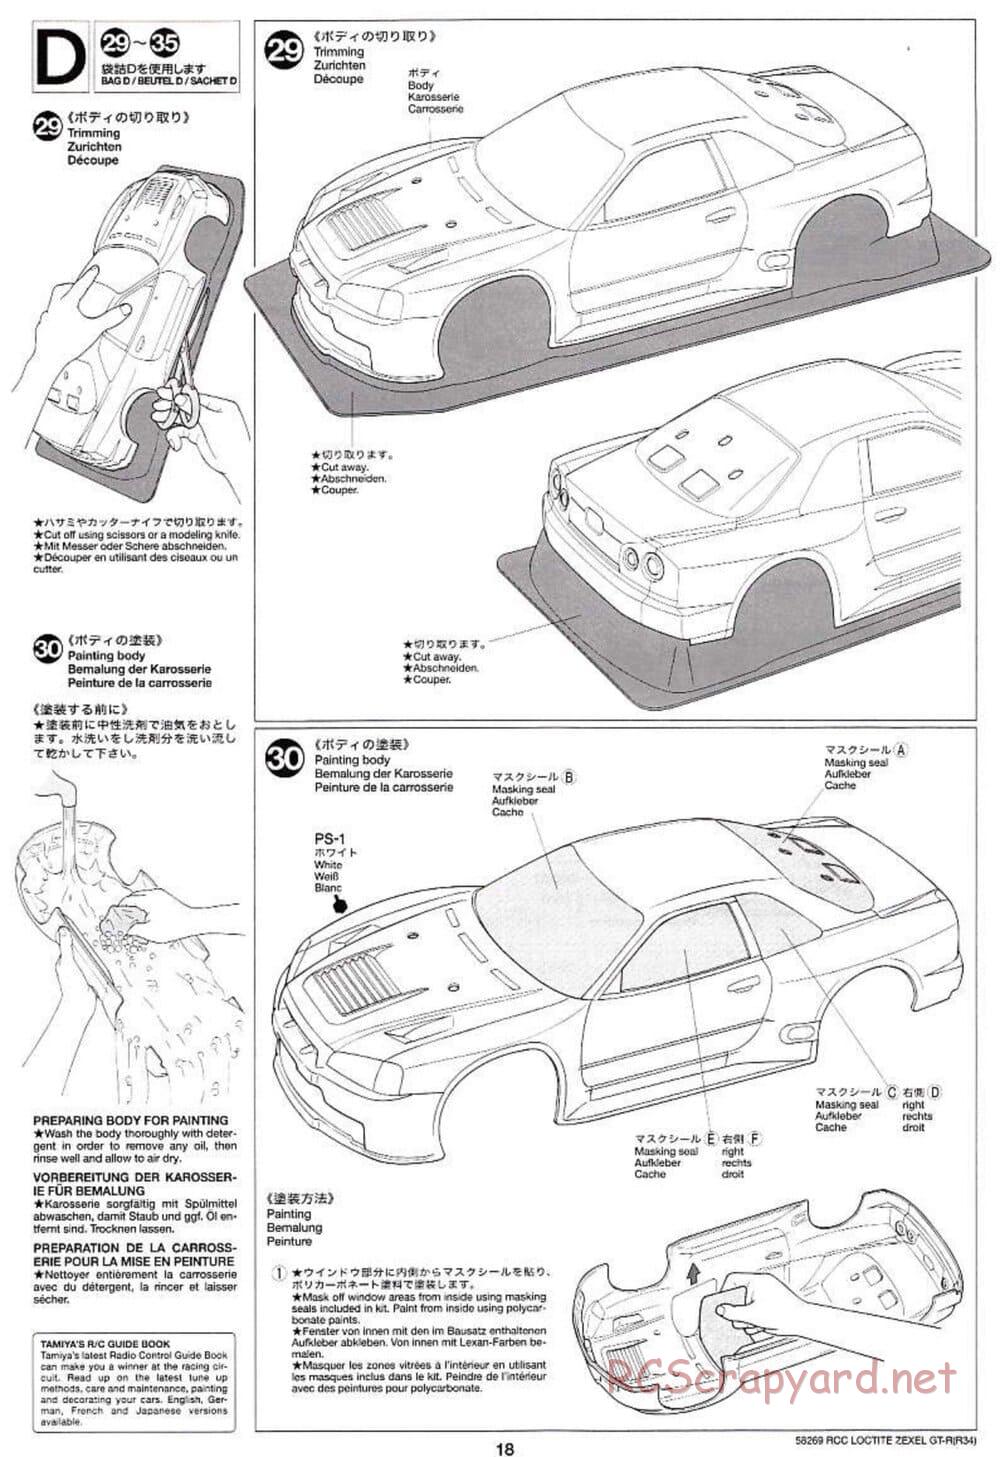 Tamiya - Loctite Zexel Skyline GT-R (R34) - TA-04 Chassis - Manual - Page 18